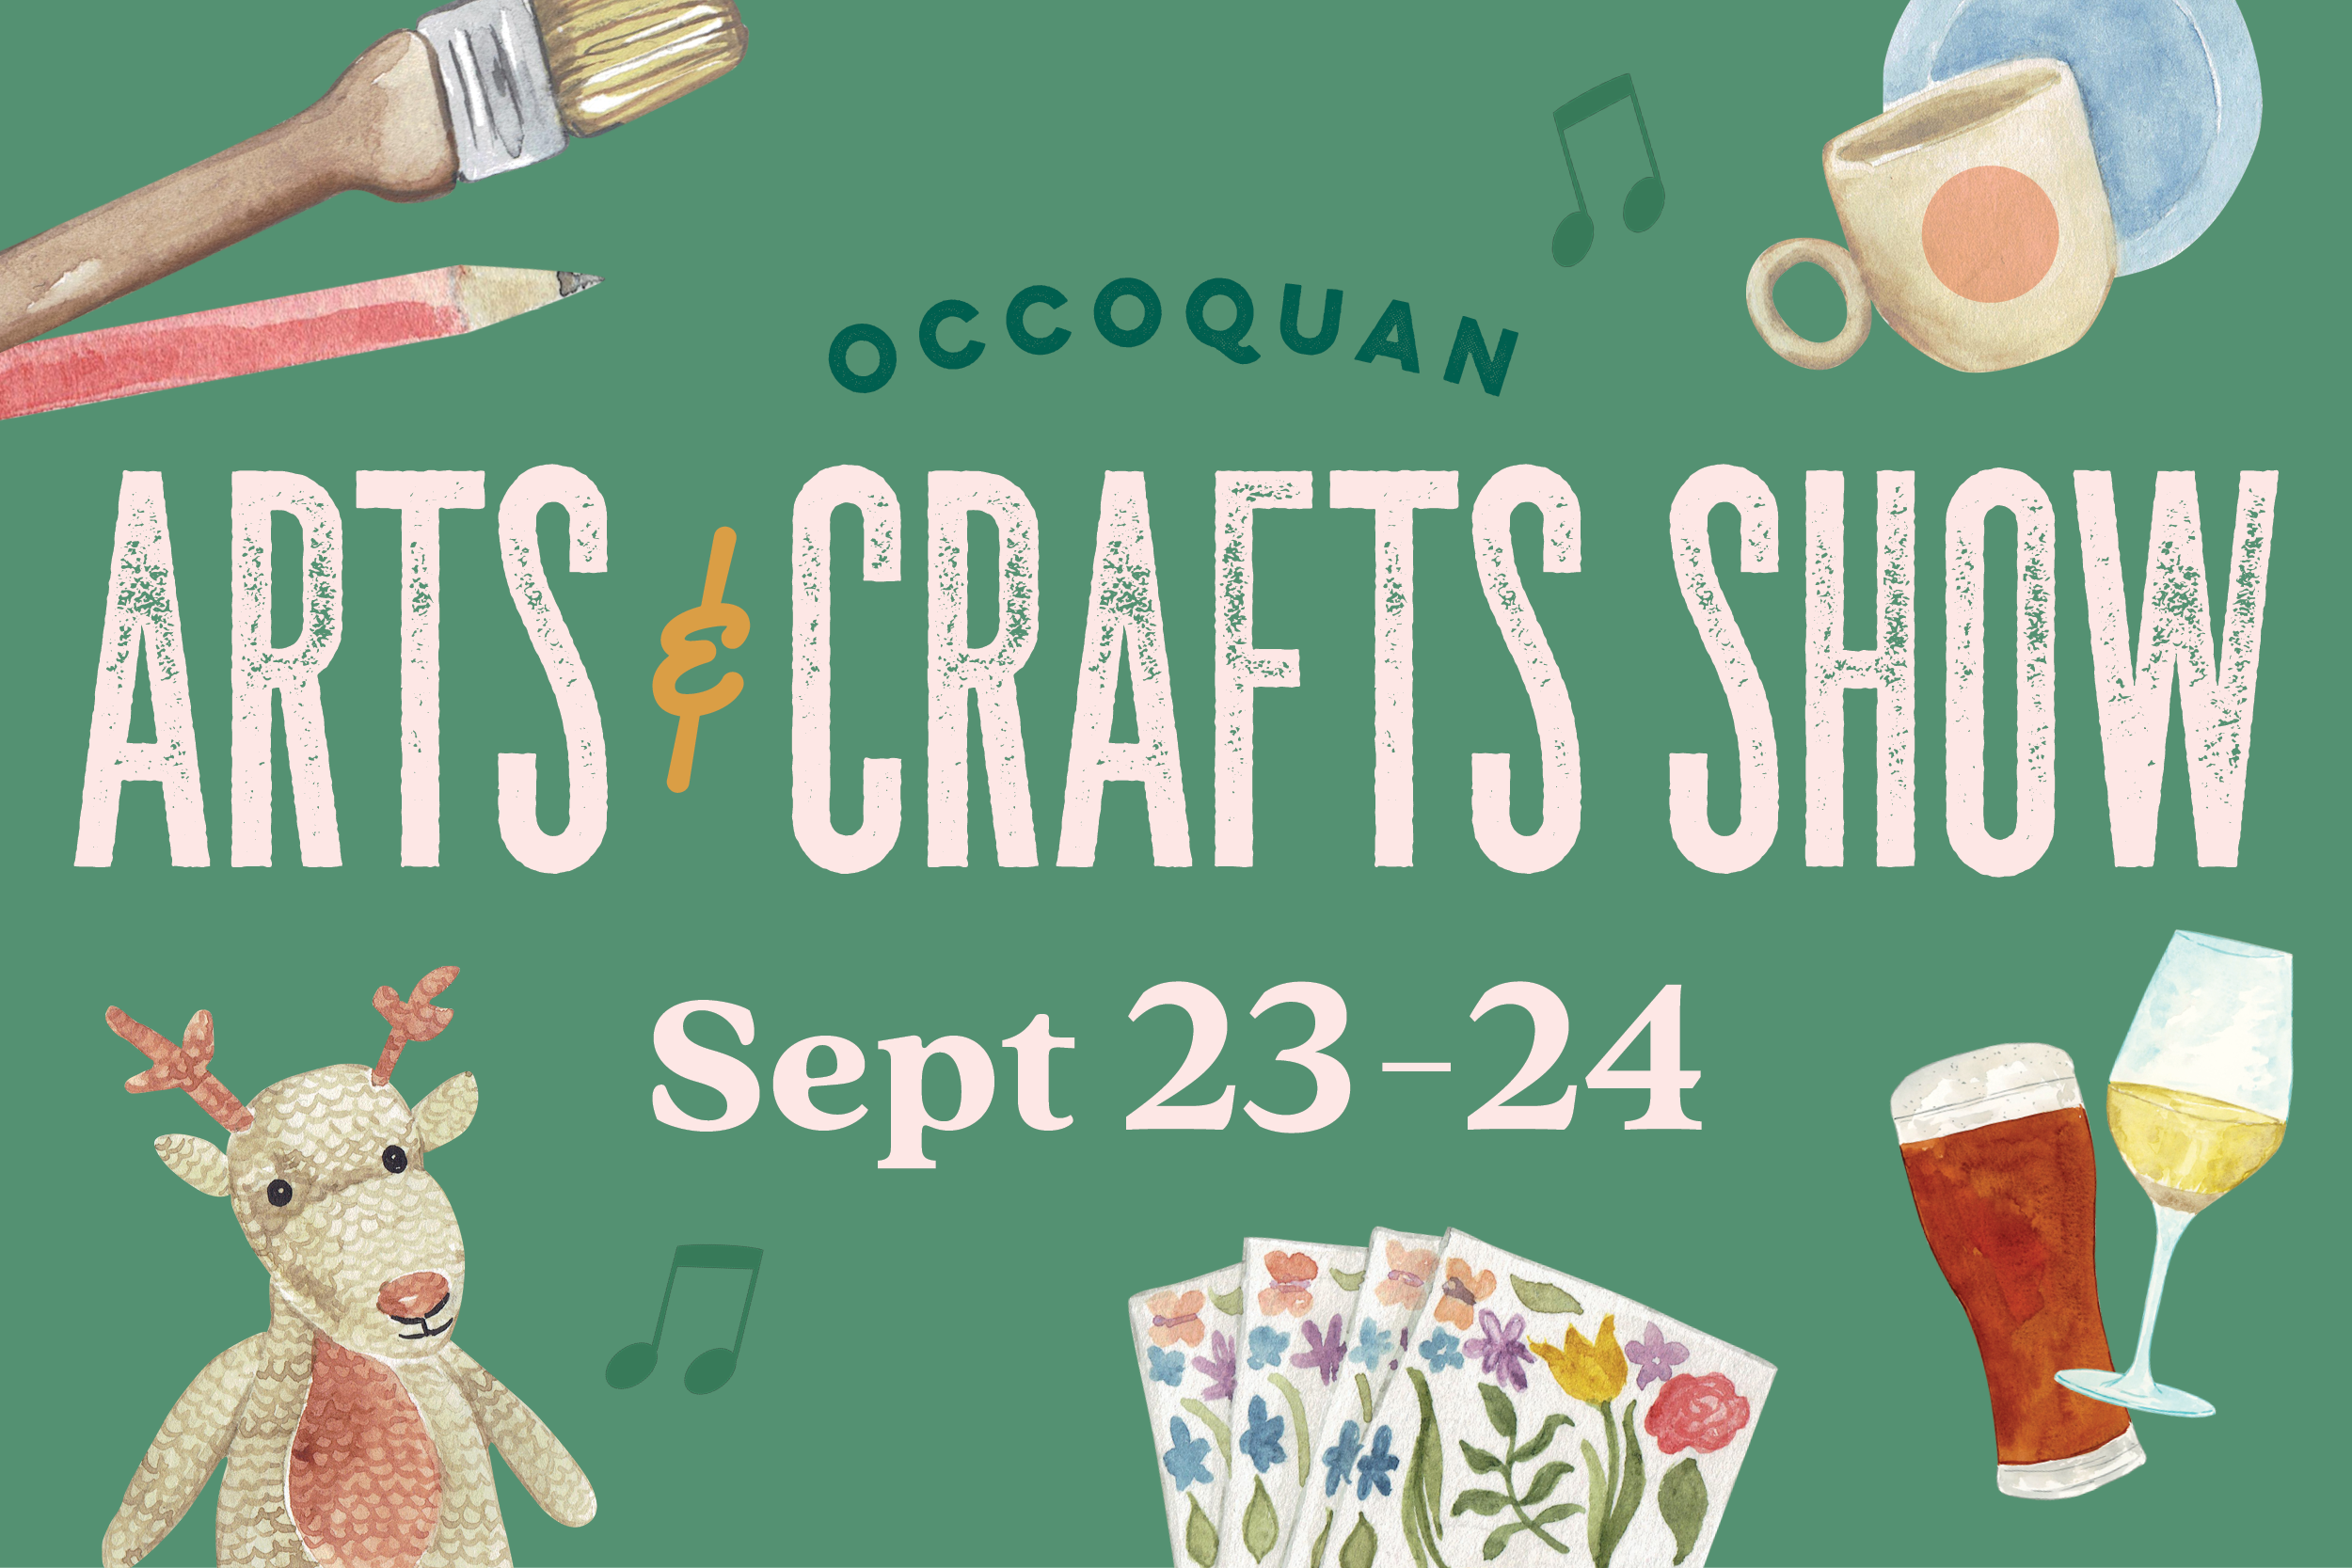 Immerse By yourself in Arts and Crafts in Occoquan